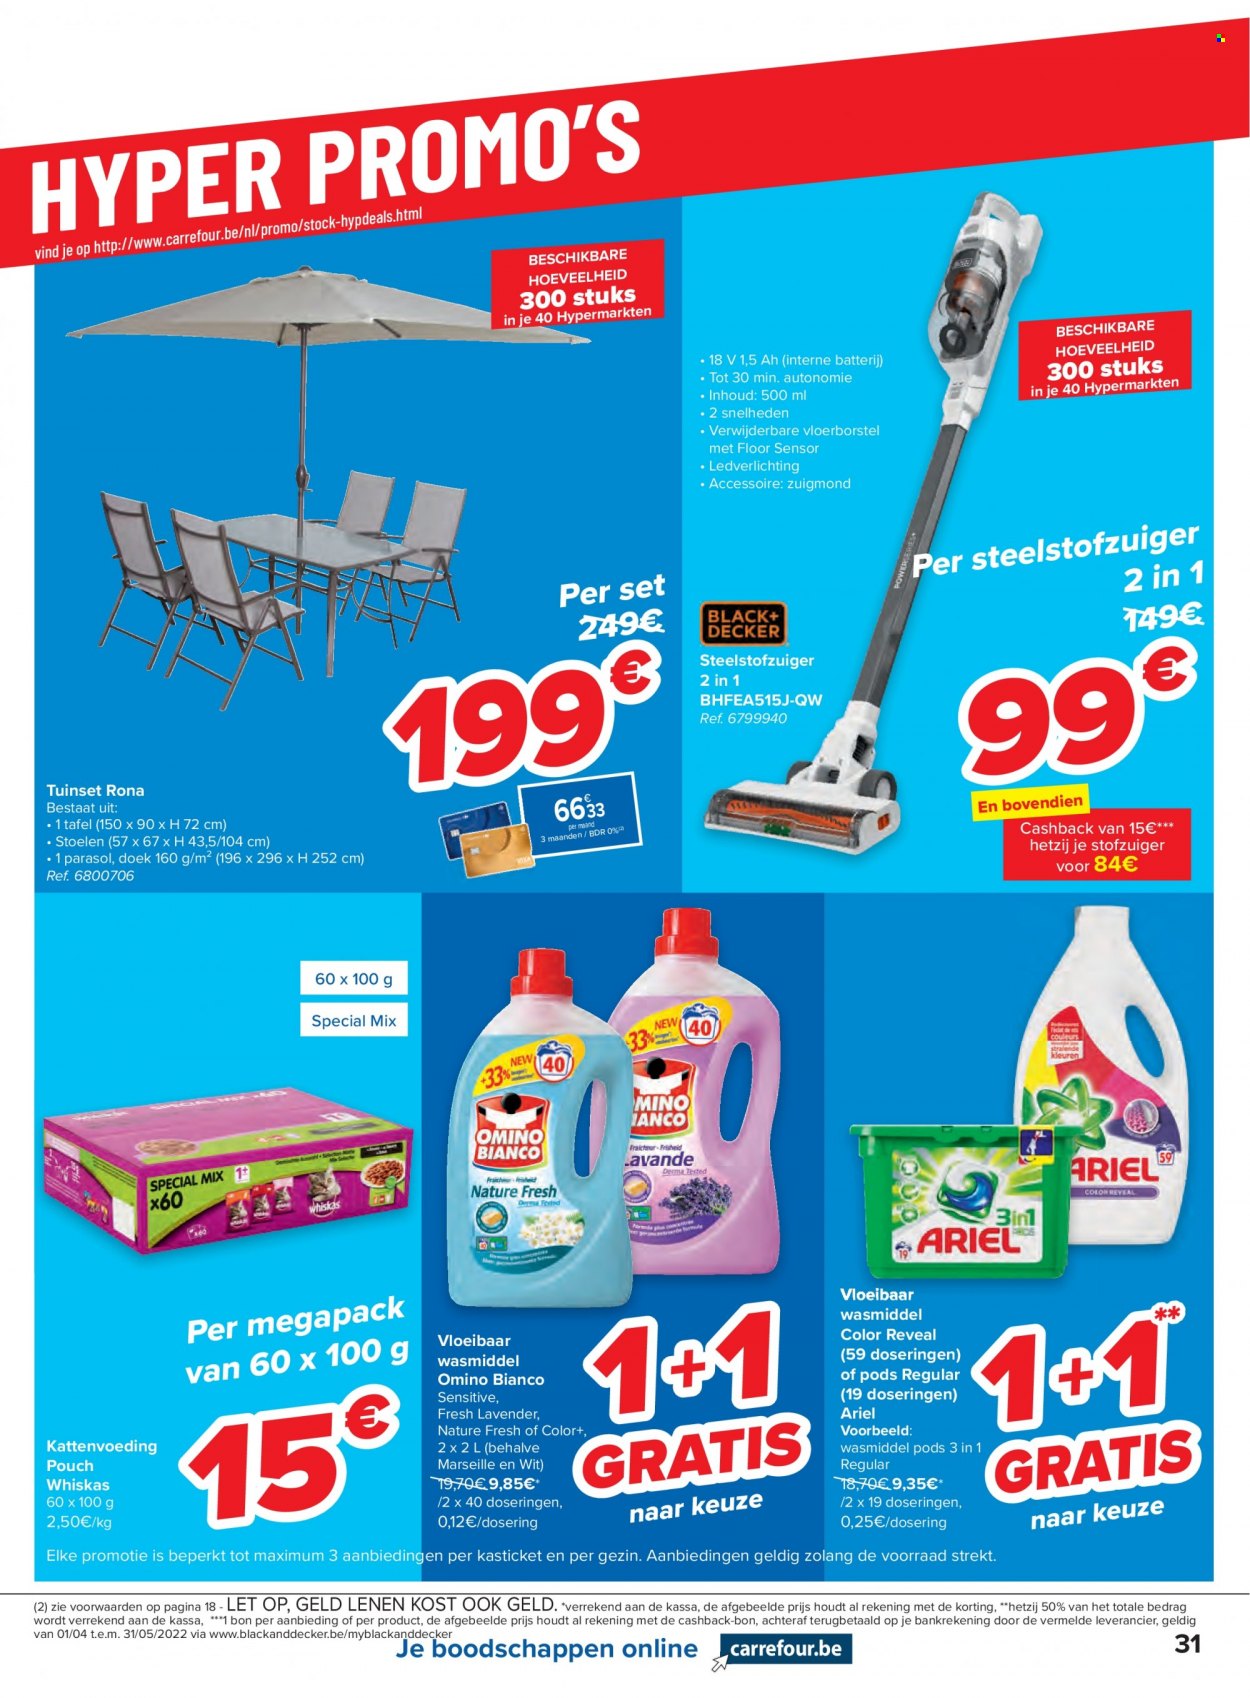 Catalogue Carrefour hypermarkt - 11.5.2022 - 23.5.2022. Page 31.